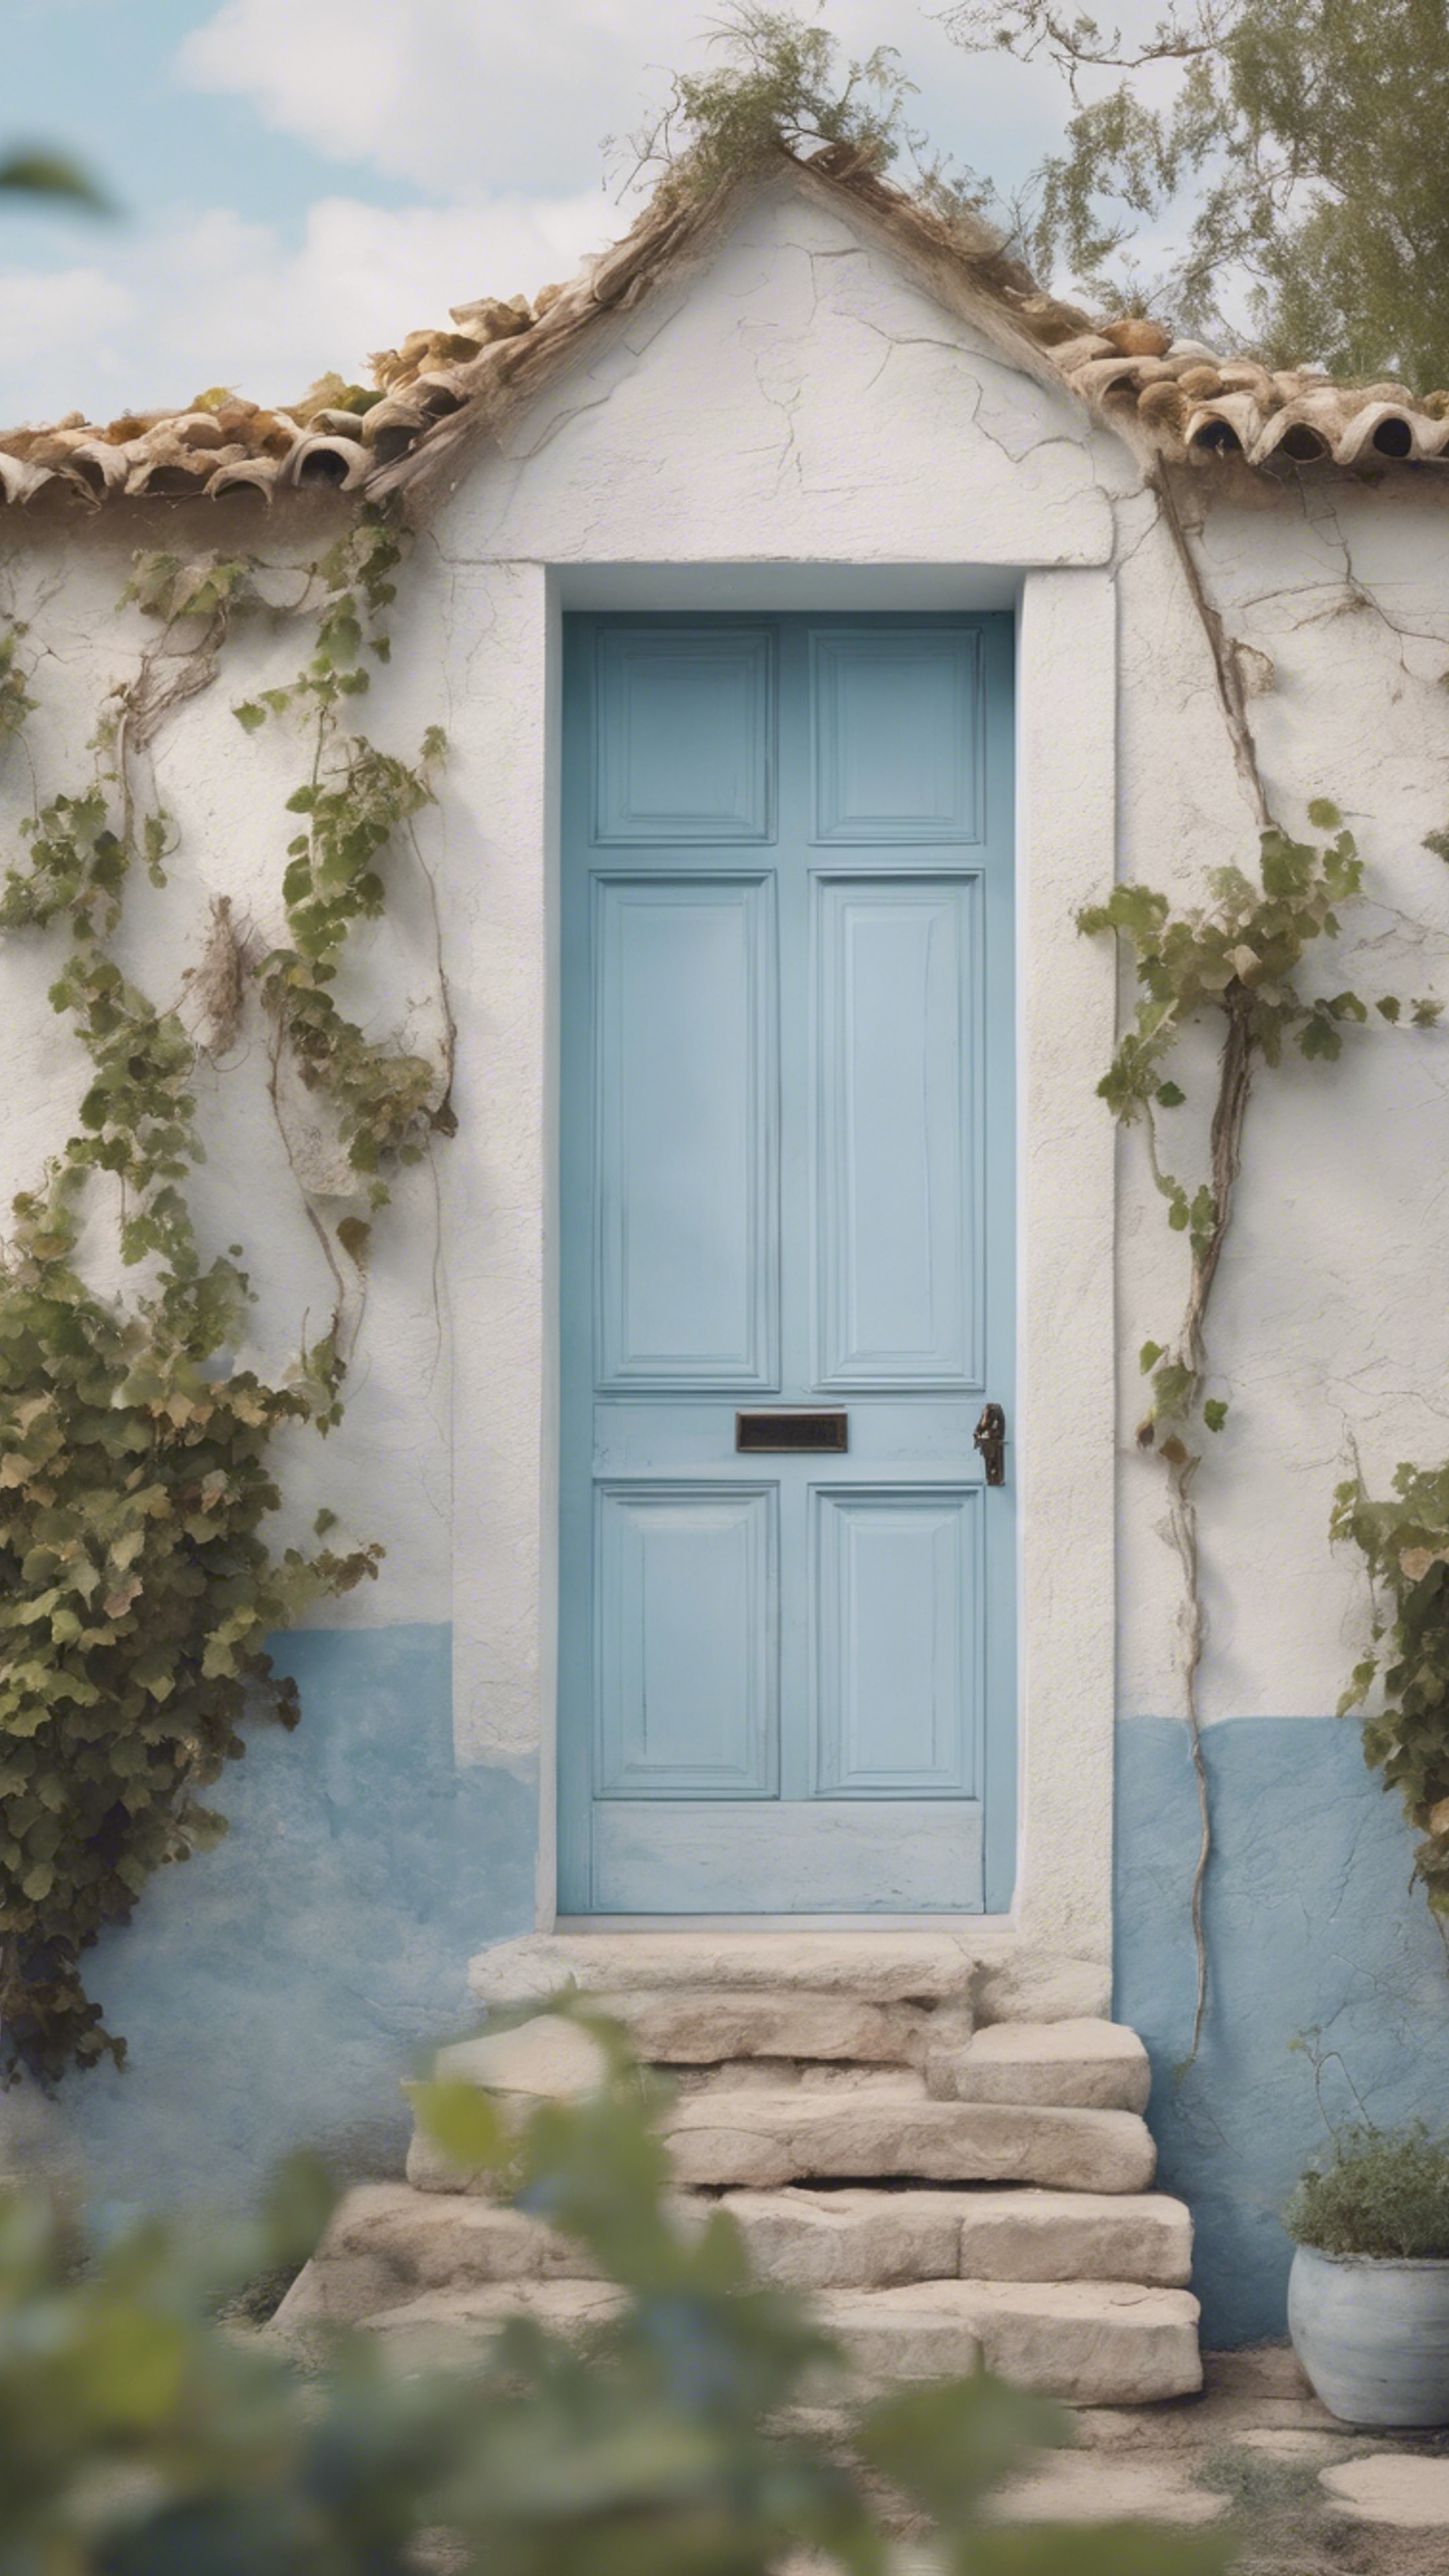 A pastel blue painted door on a rustic white house, a vineyard in the background. Tapet[5cba61123f91494ab86f]